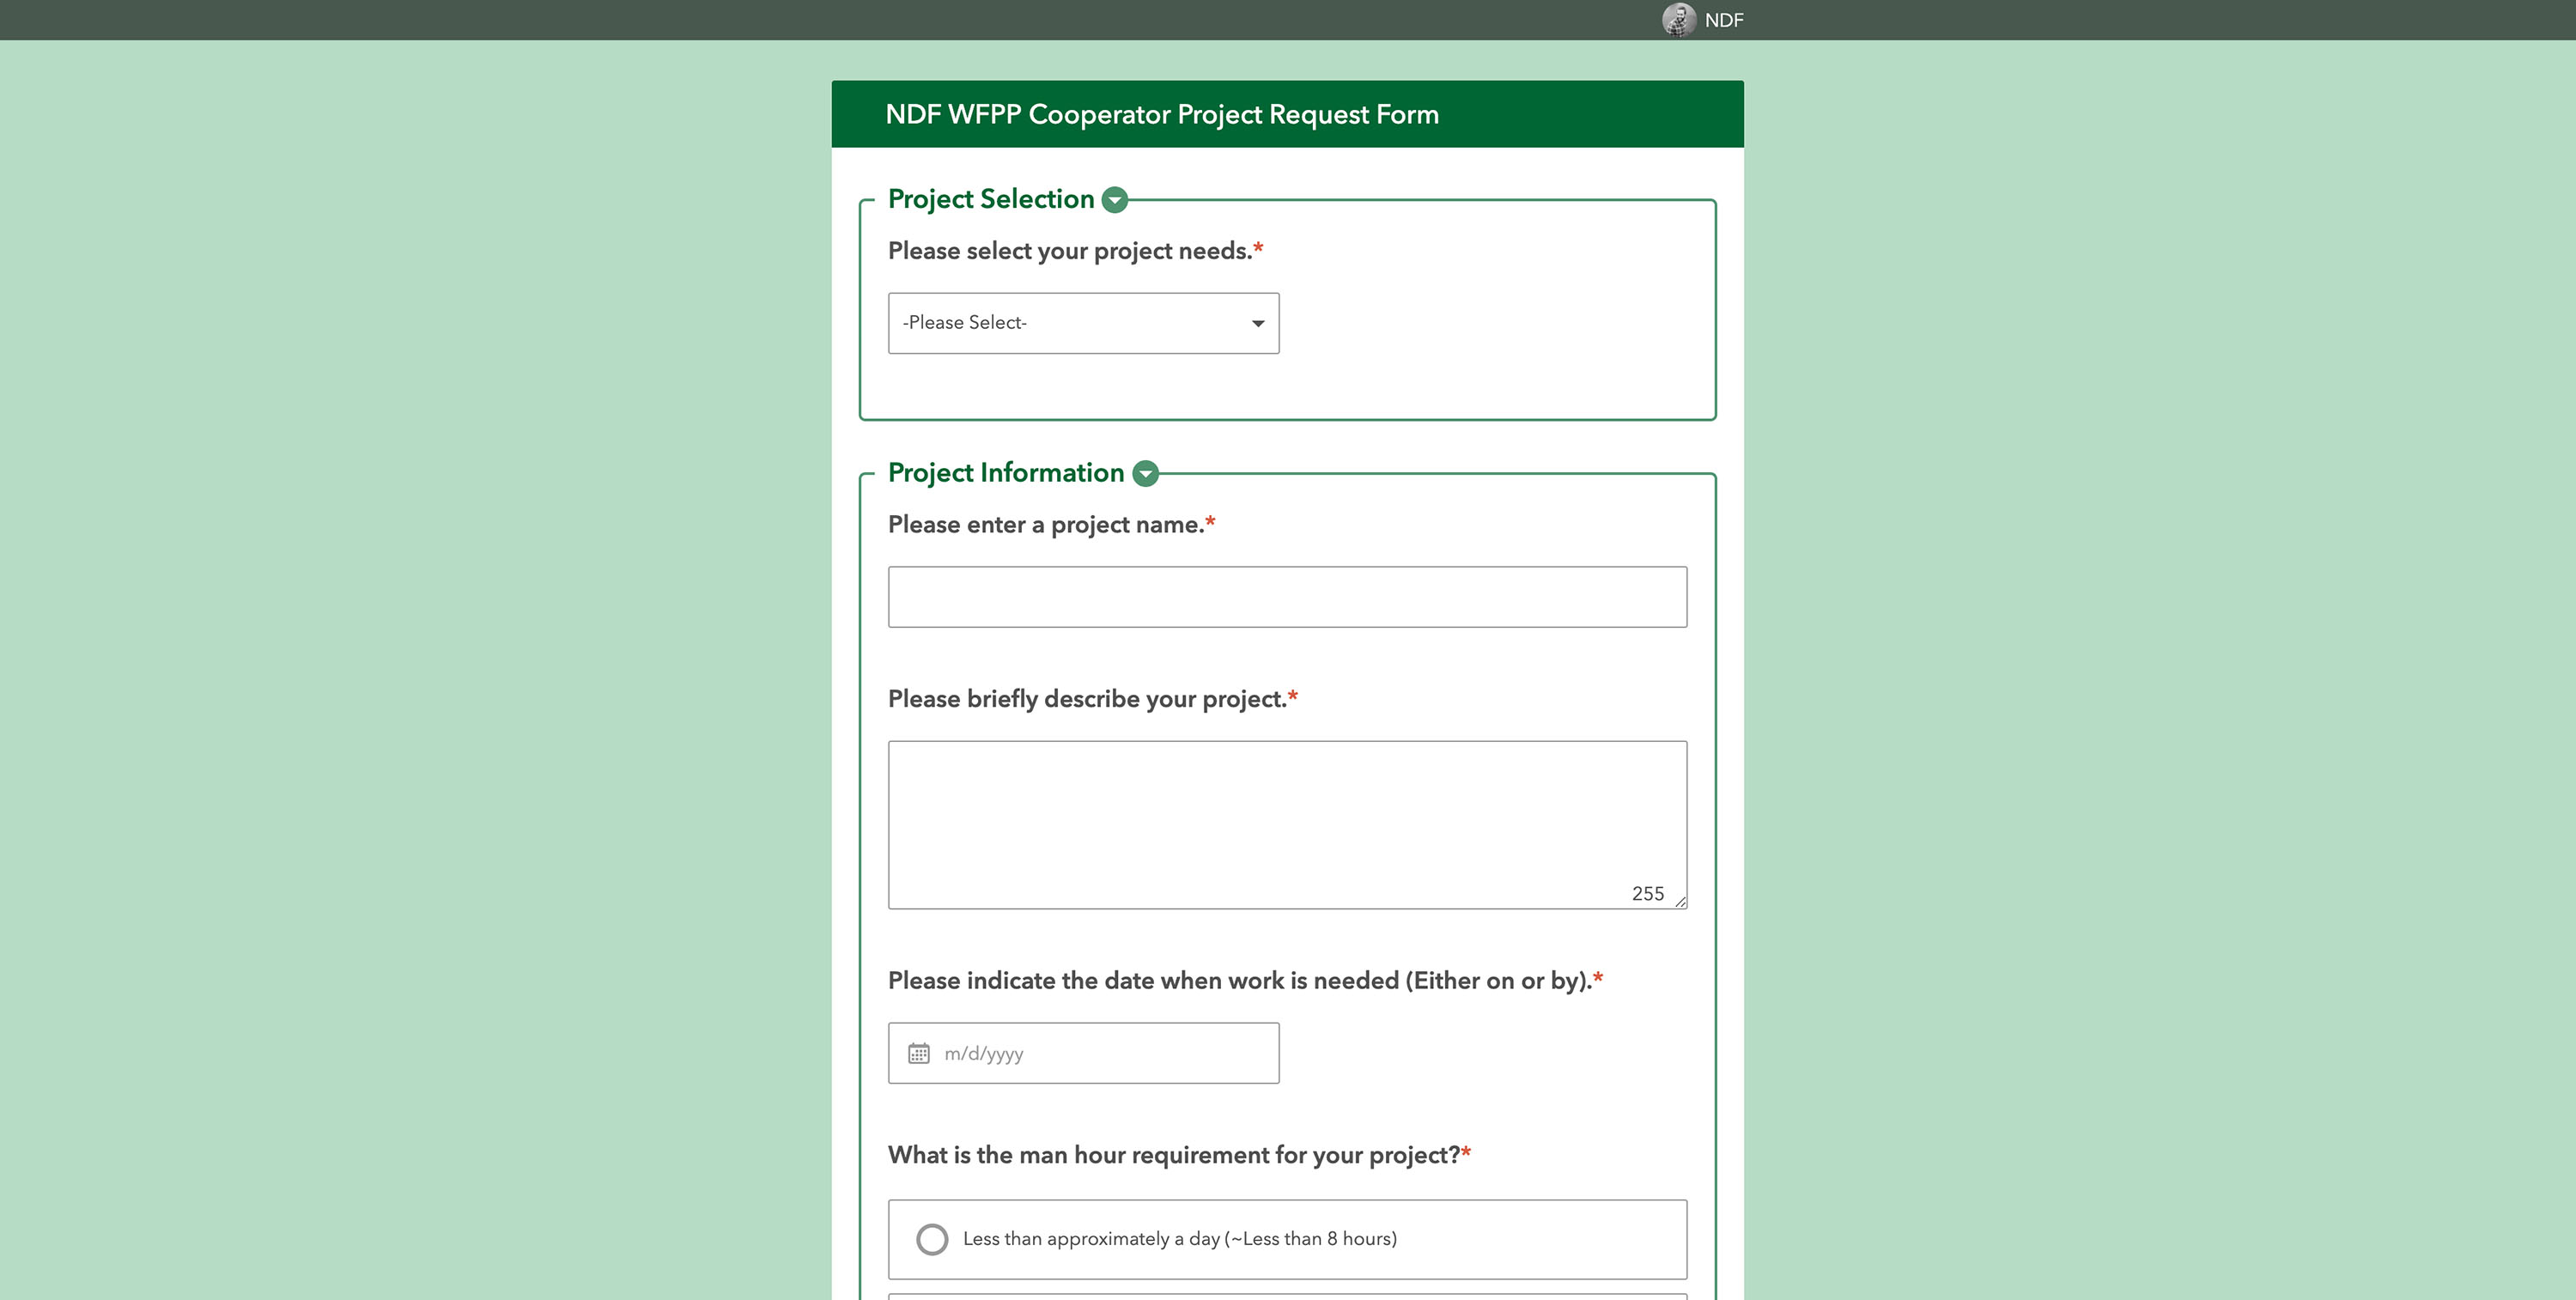 Screenshot showing the WFPP Cooperator Project Request Form.